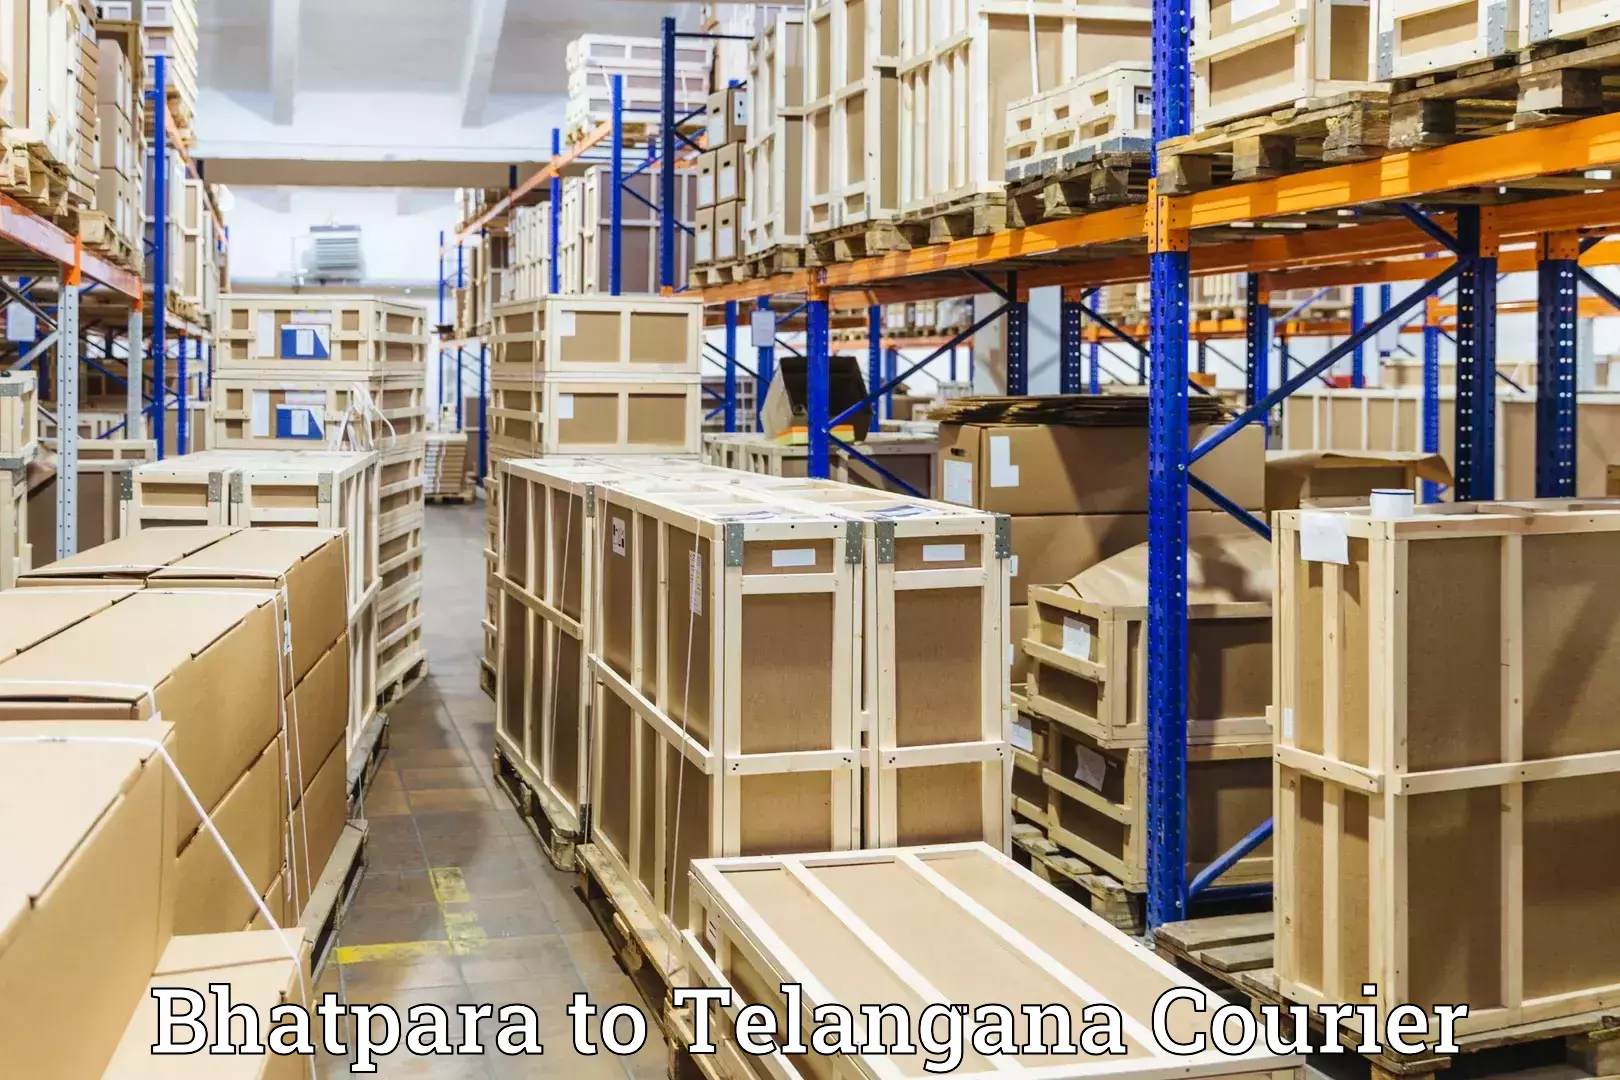 Luggage shipment processing in Bhatpara to Mancherial